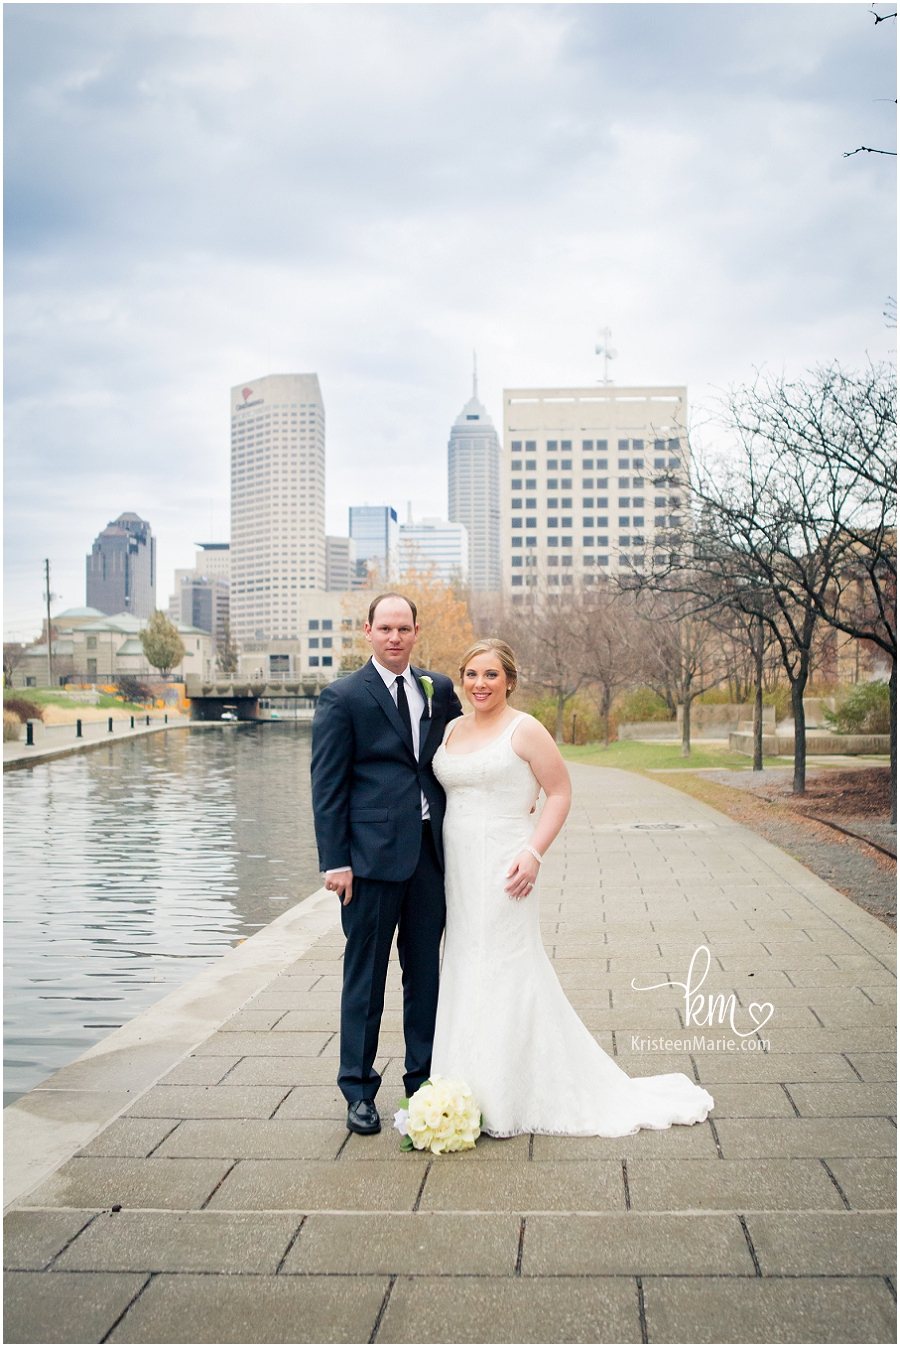 Downtown Indianapolis Wedding Photography - City Backdrop